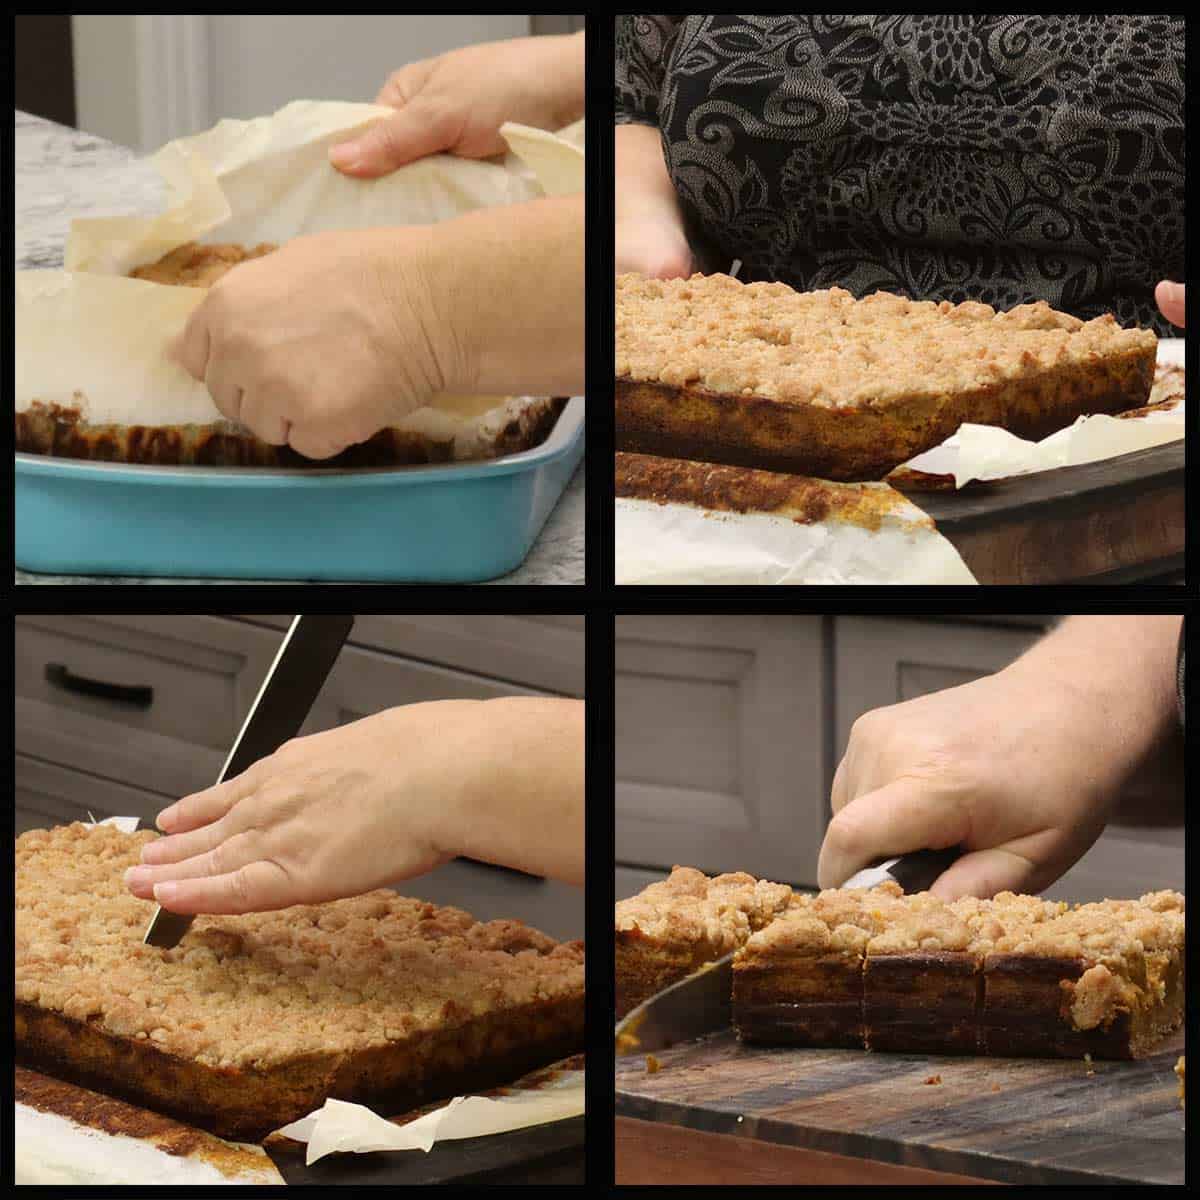 Cutting the cold pumpkin pie crumble into squares.